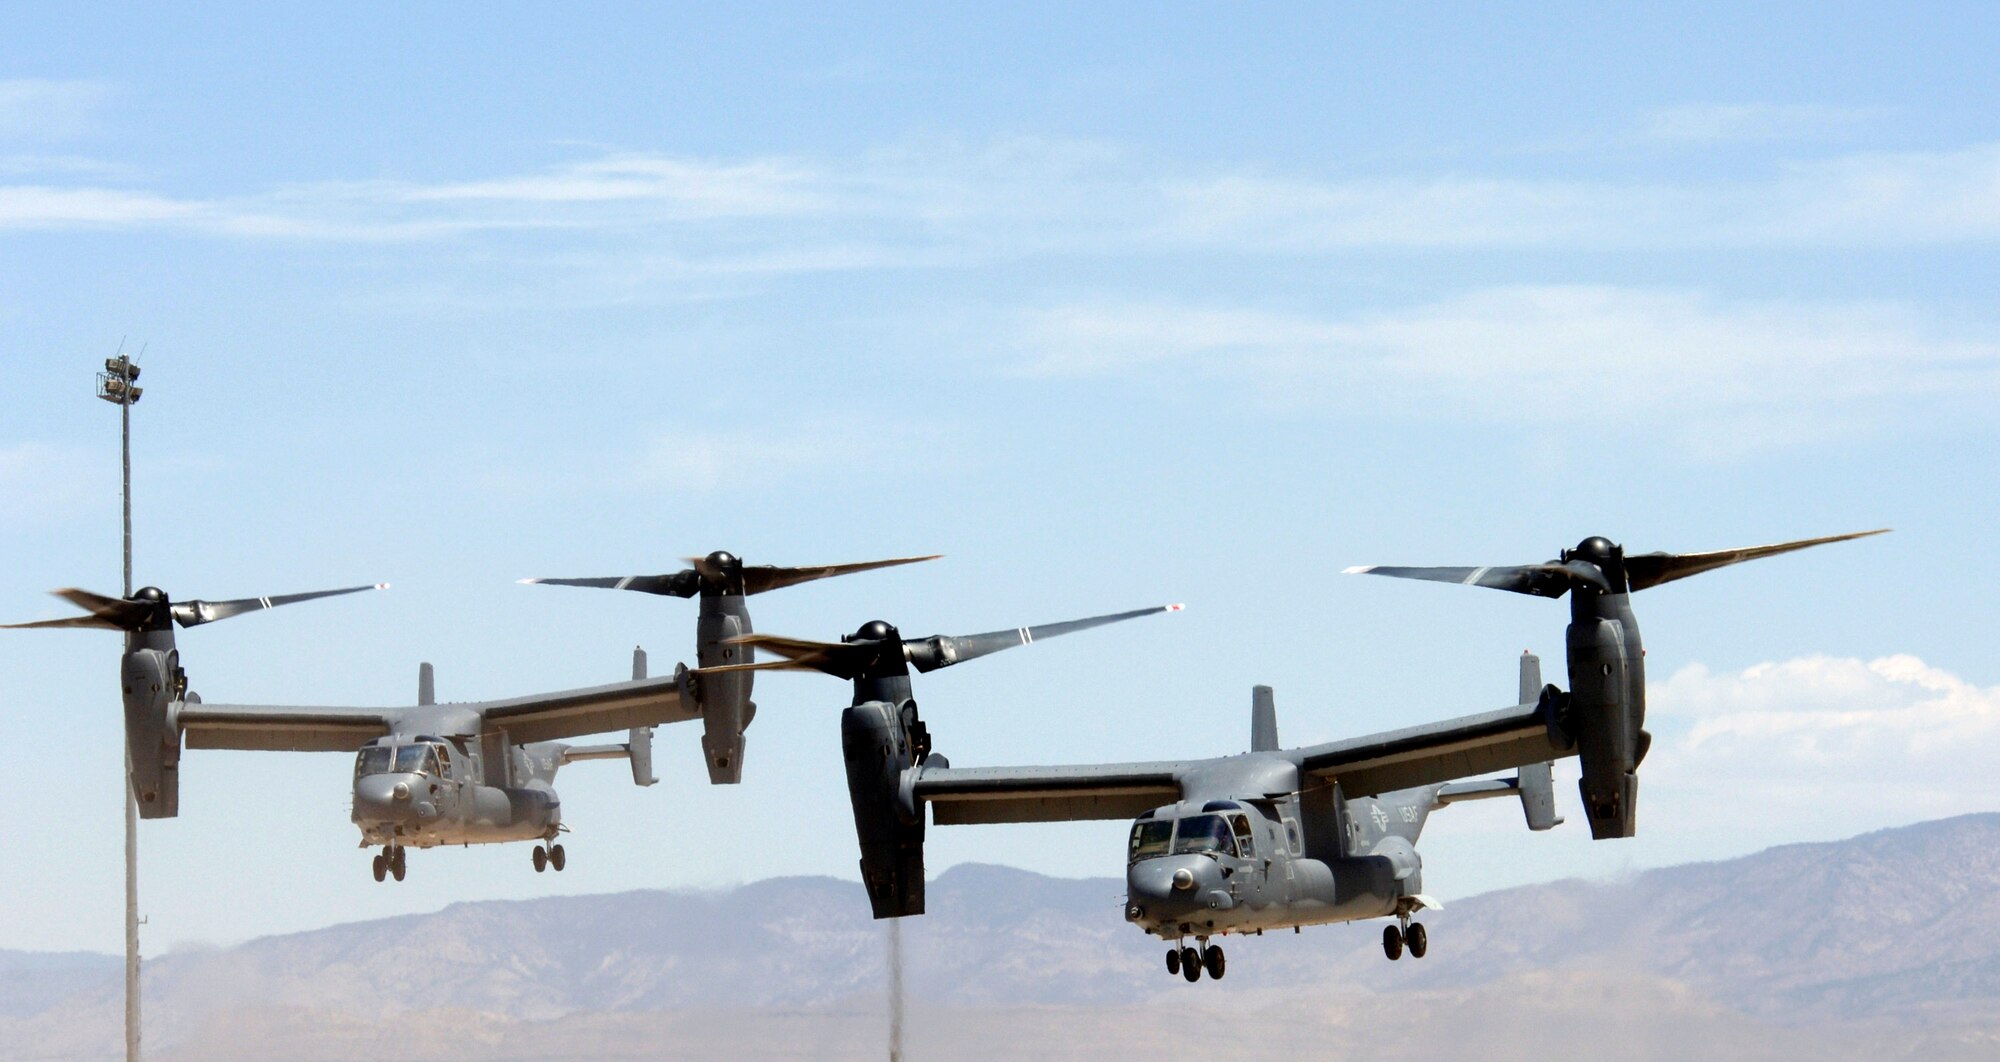 Two Air Force CV-22 Ospreys prepare to land at Holloman Air Force Base, N.M., on Friday, May 26, 2006. These Osprey are two of only three in the Air Force inventory. The Ospreys and their crews are taking part in the filming of the movie, "Transformers." (U.S. Air Force photo/Airman 1st Class Russell Scalf)
